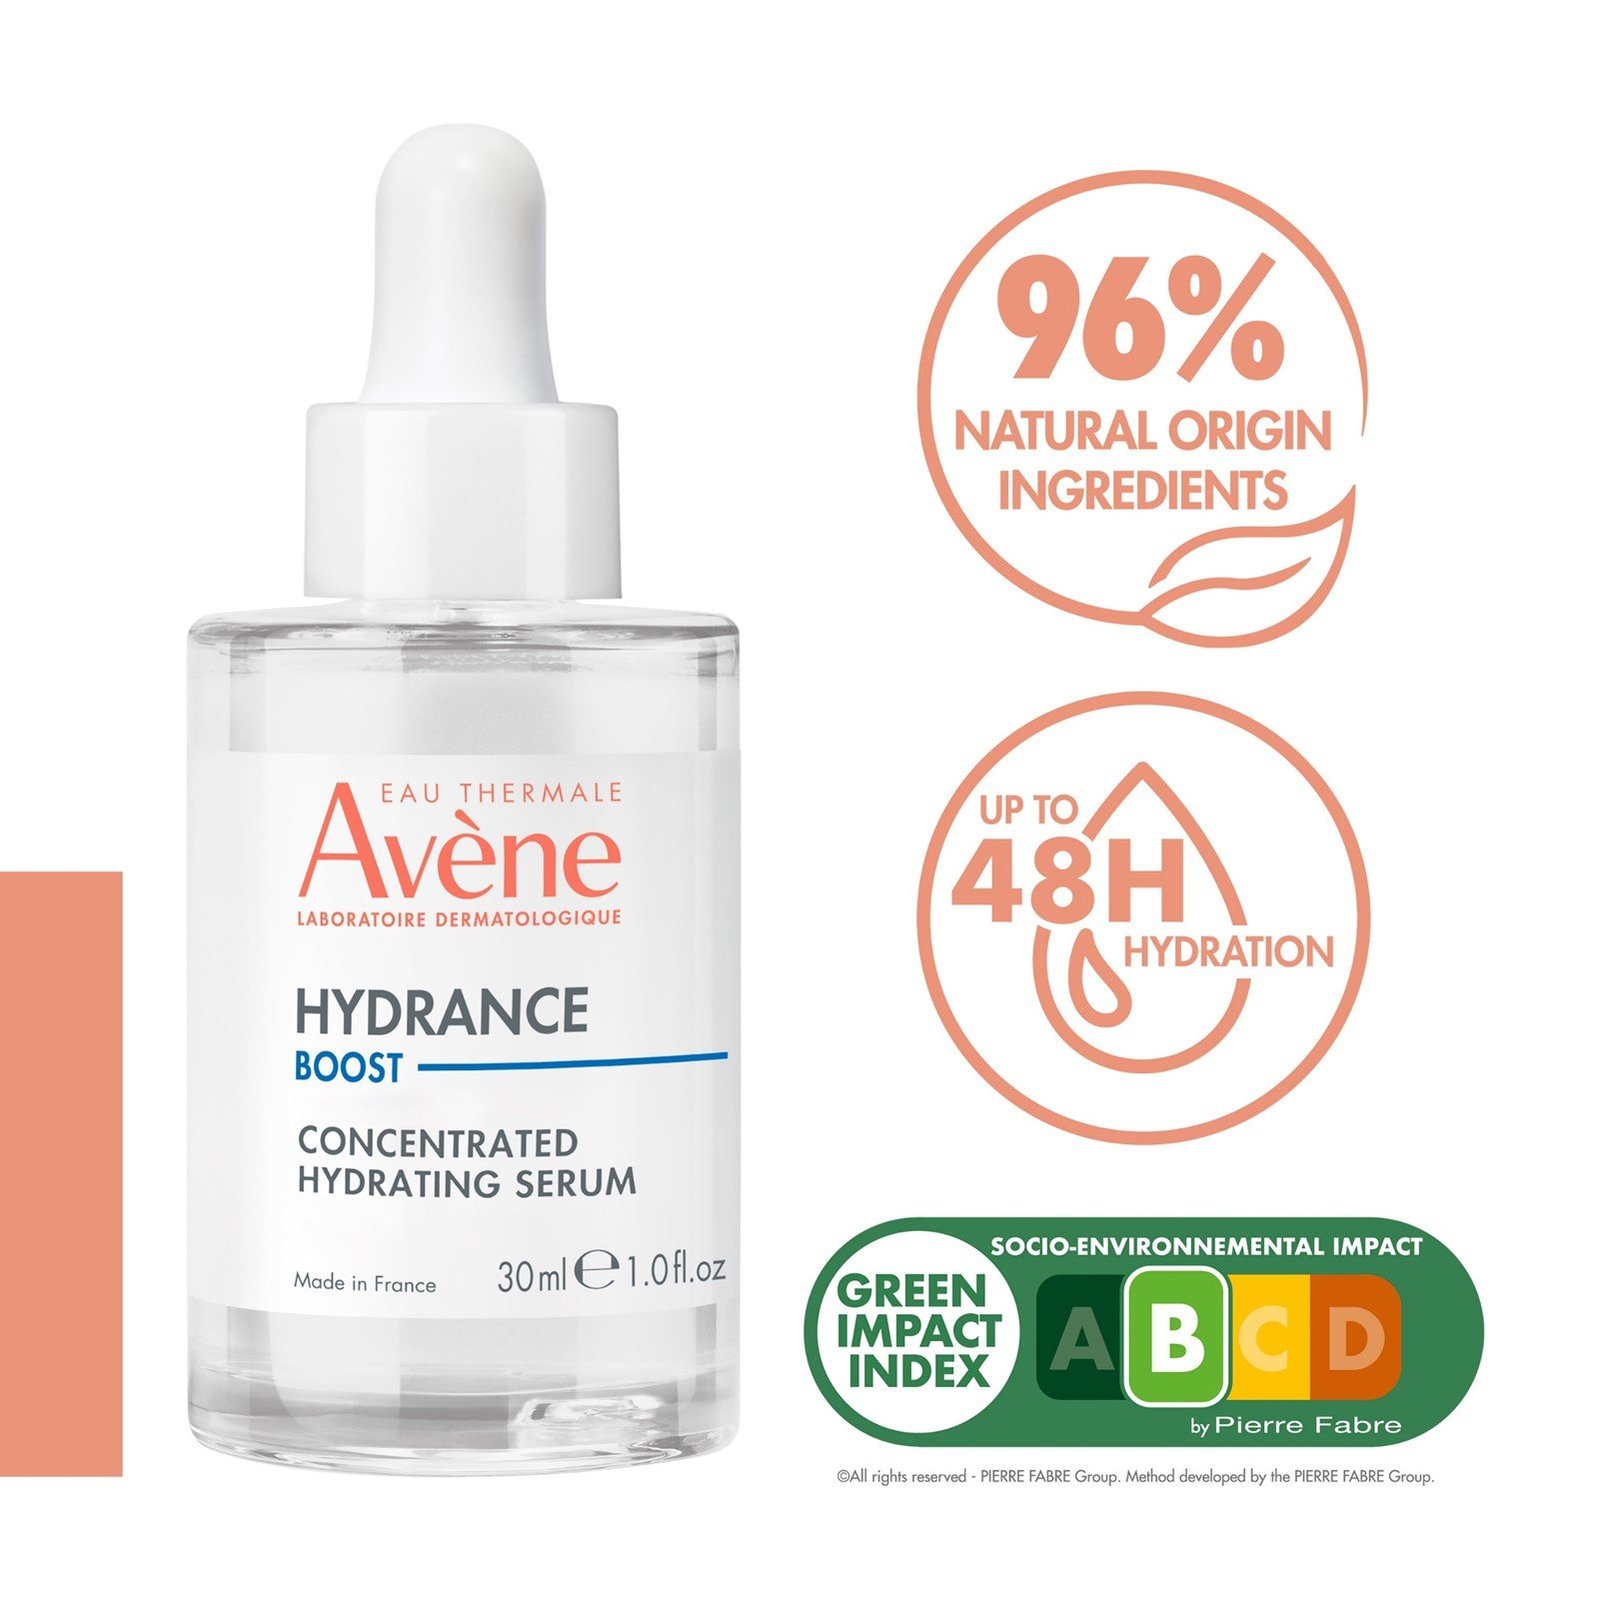 Buy Avène Hydrance Boost Concentrated Hydrating Serum 30ml (1.0 fl